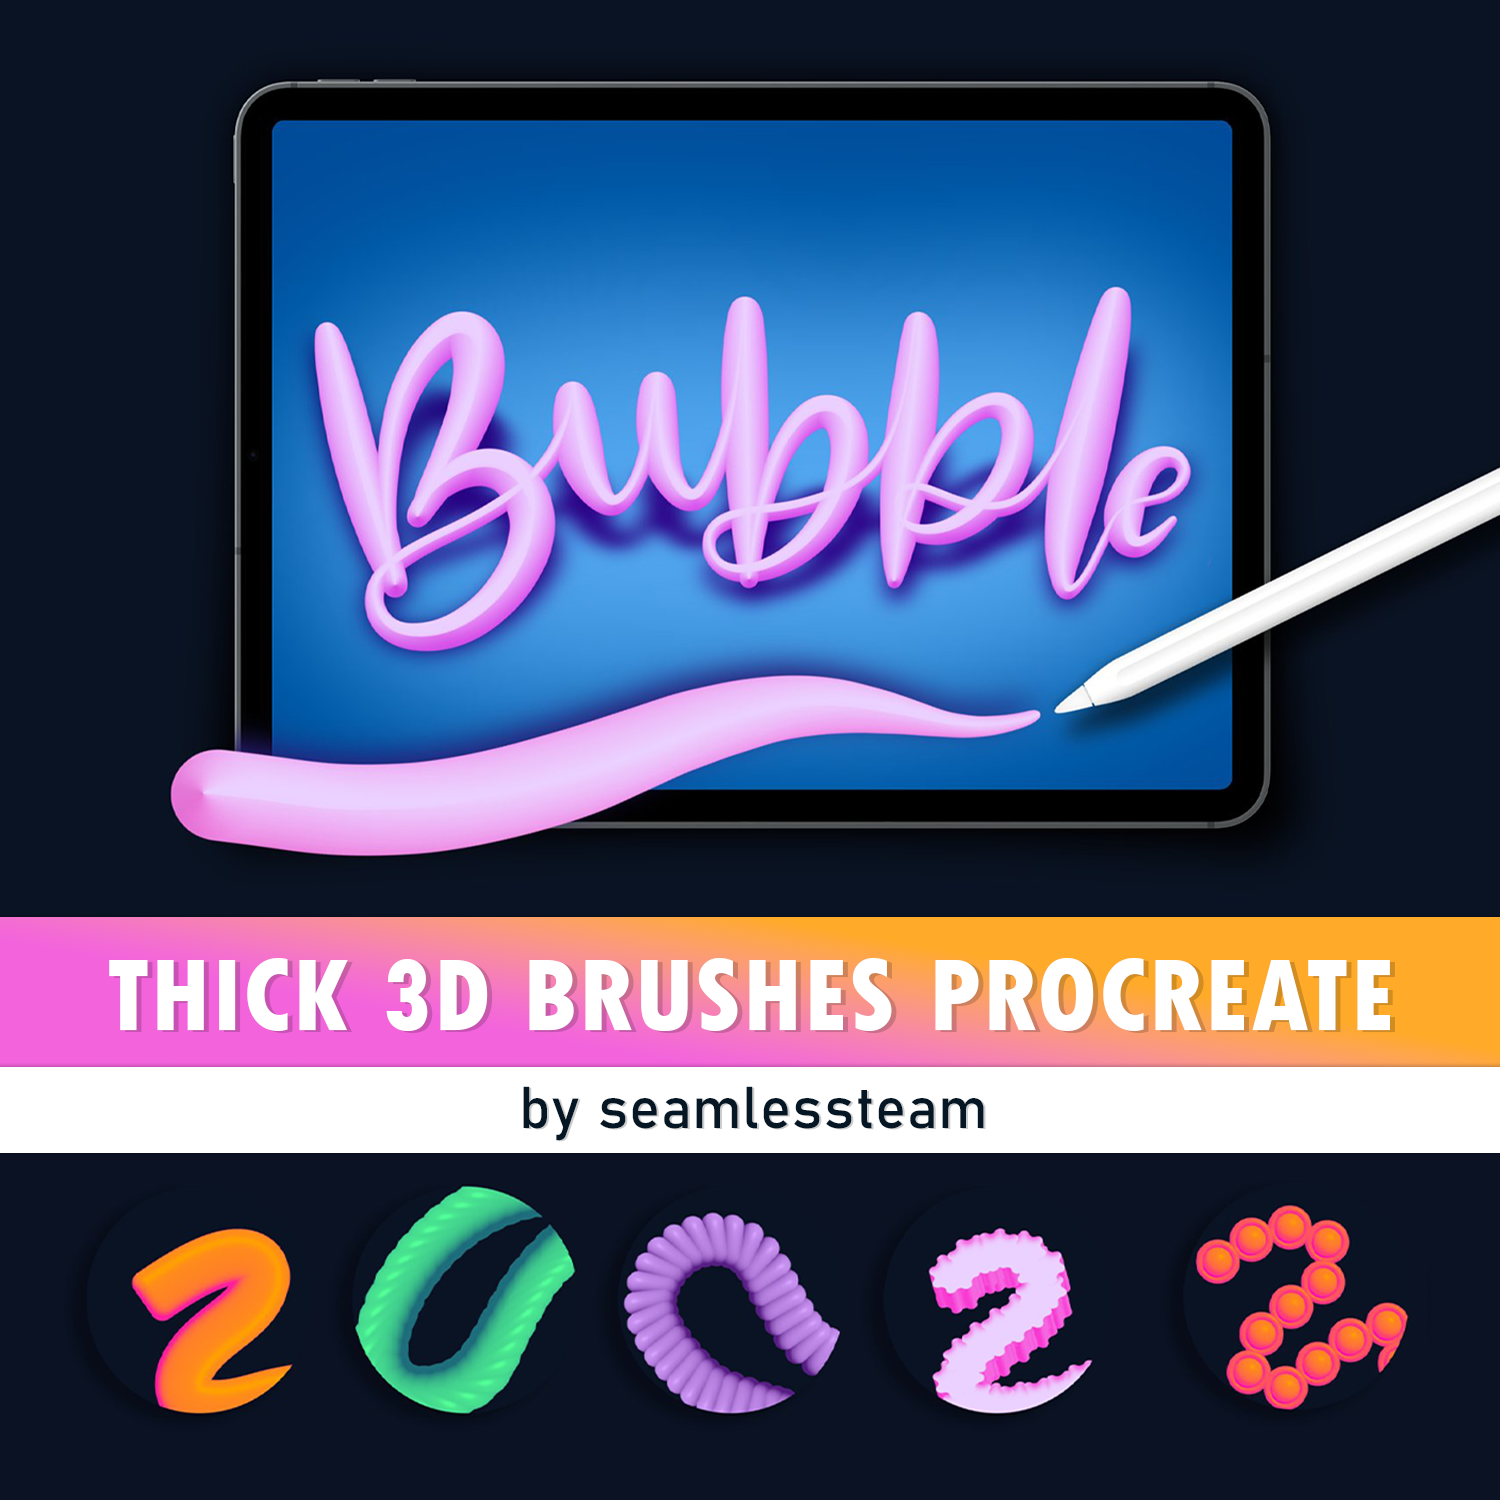 Thick 3D Brushes Procreate created by seamlessteam.